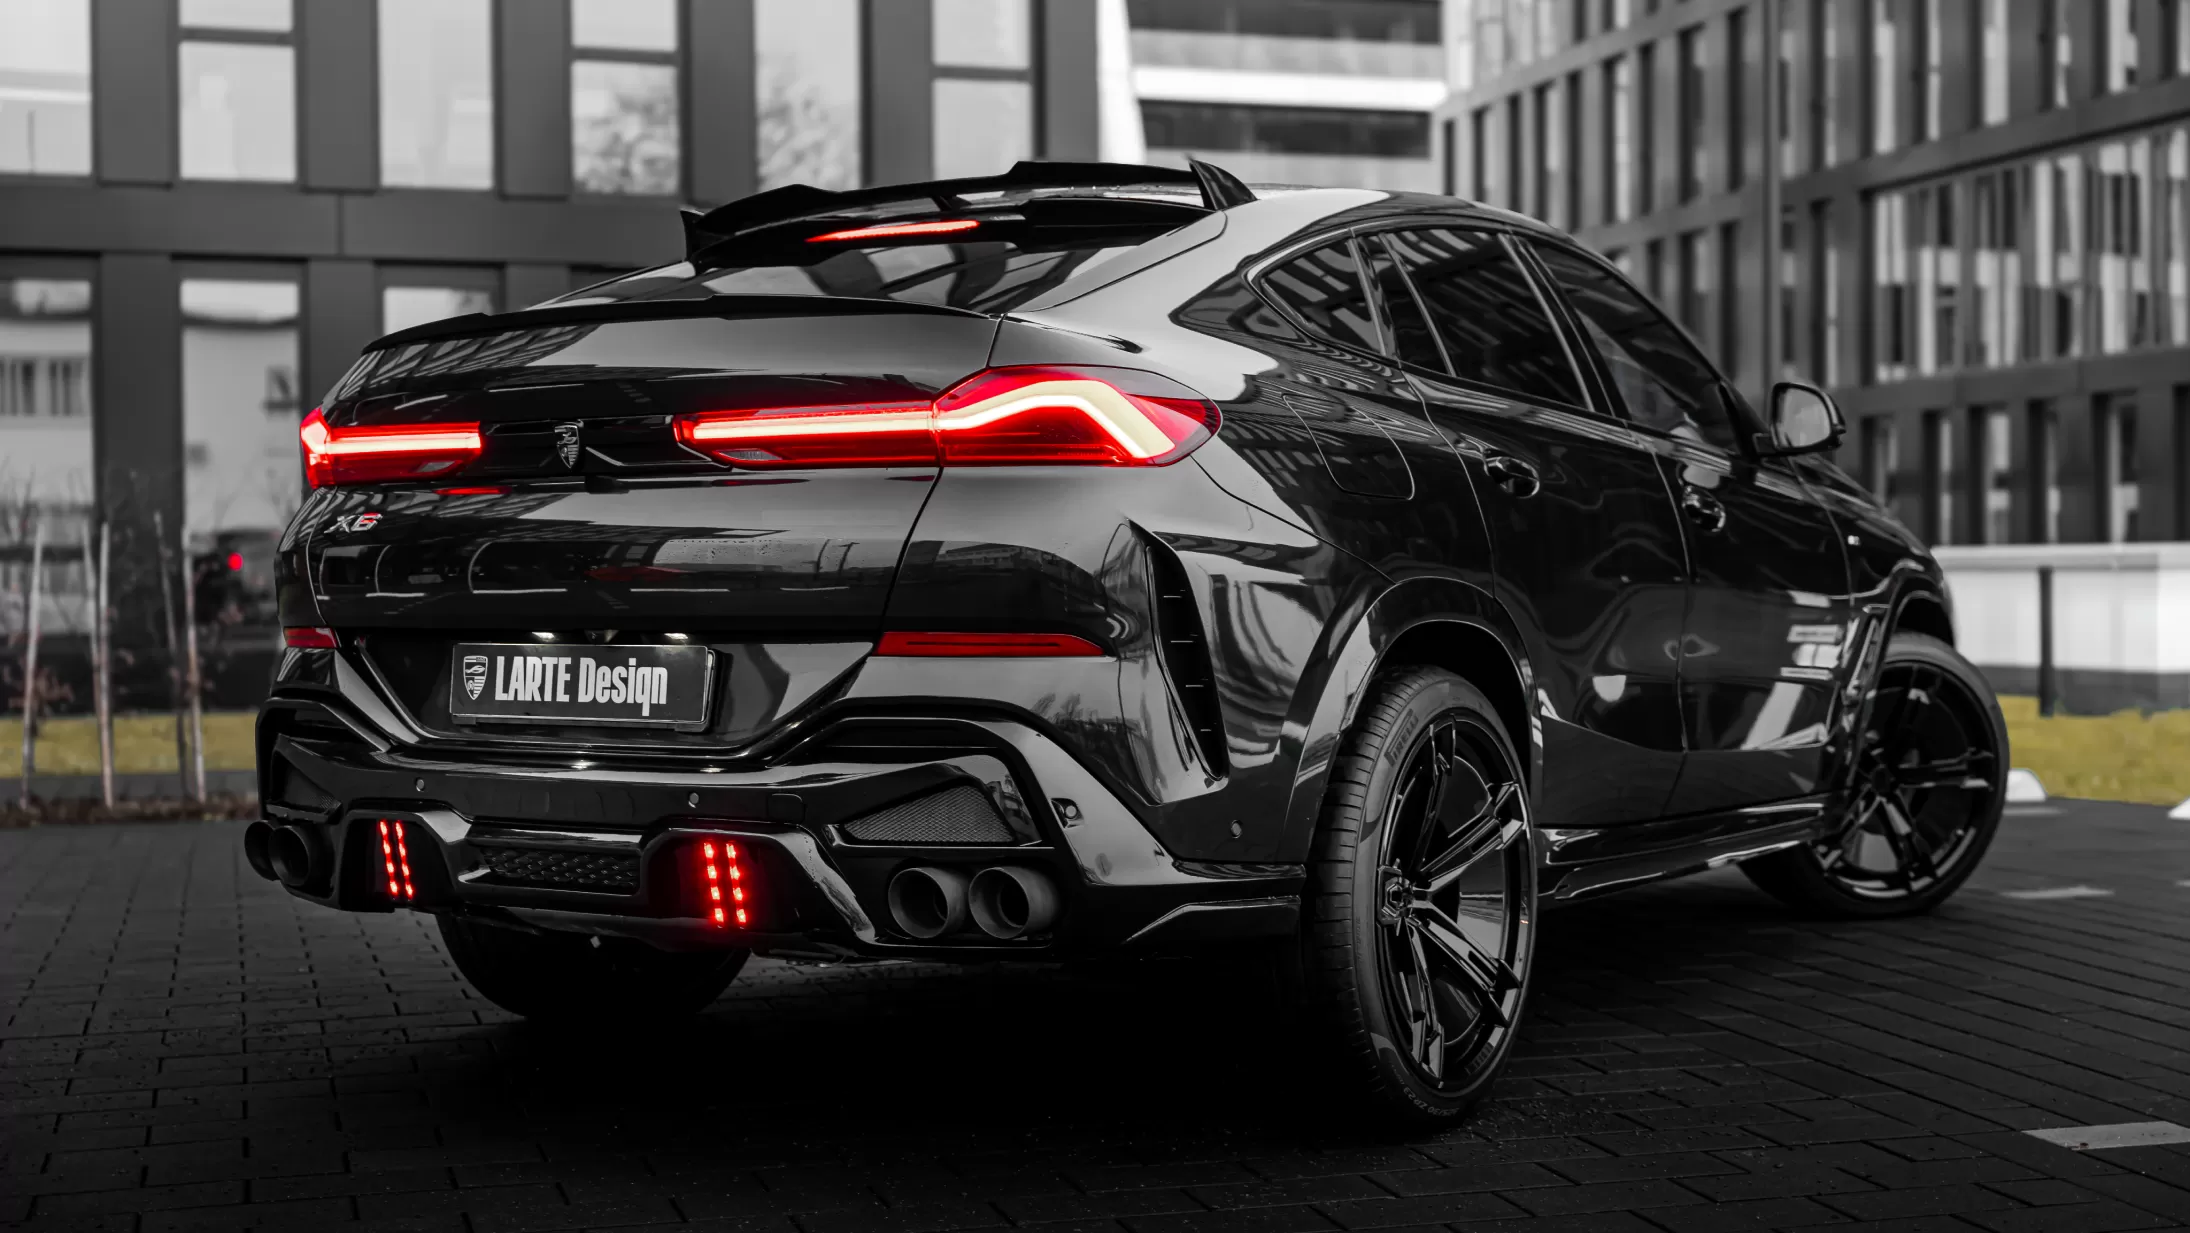 Rear angle view on a BMW X6 LCI Facelift with a body kit giving the car a custom appearance